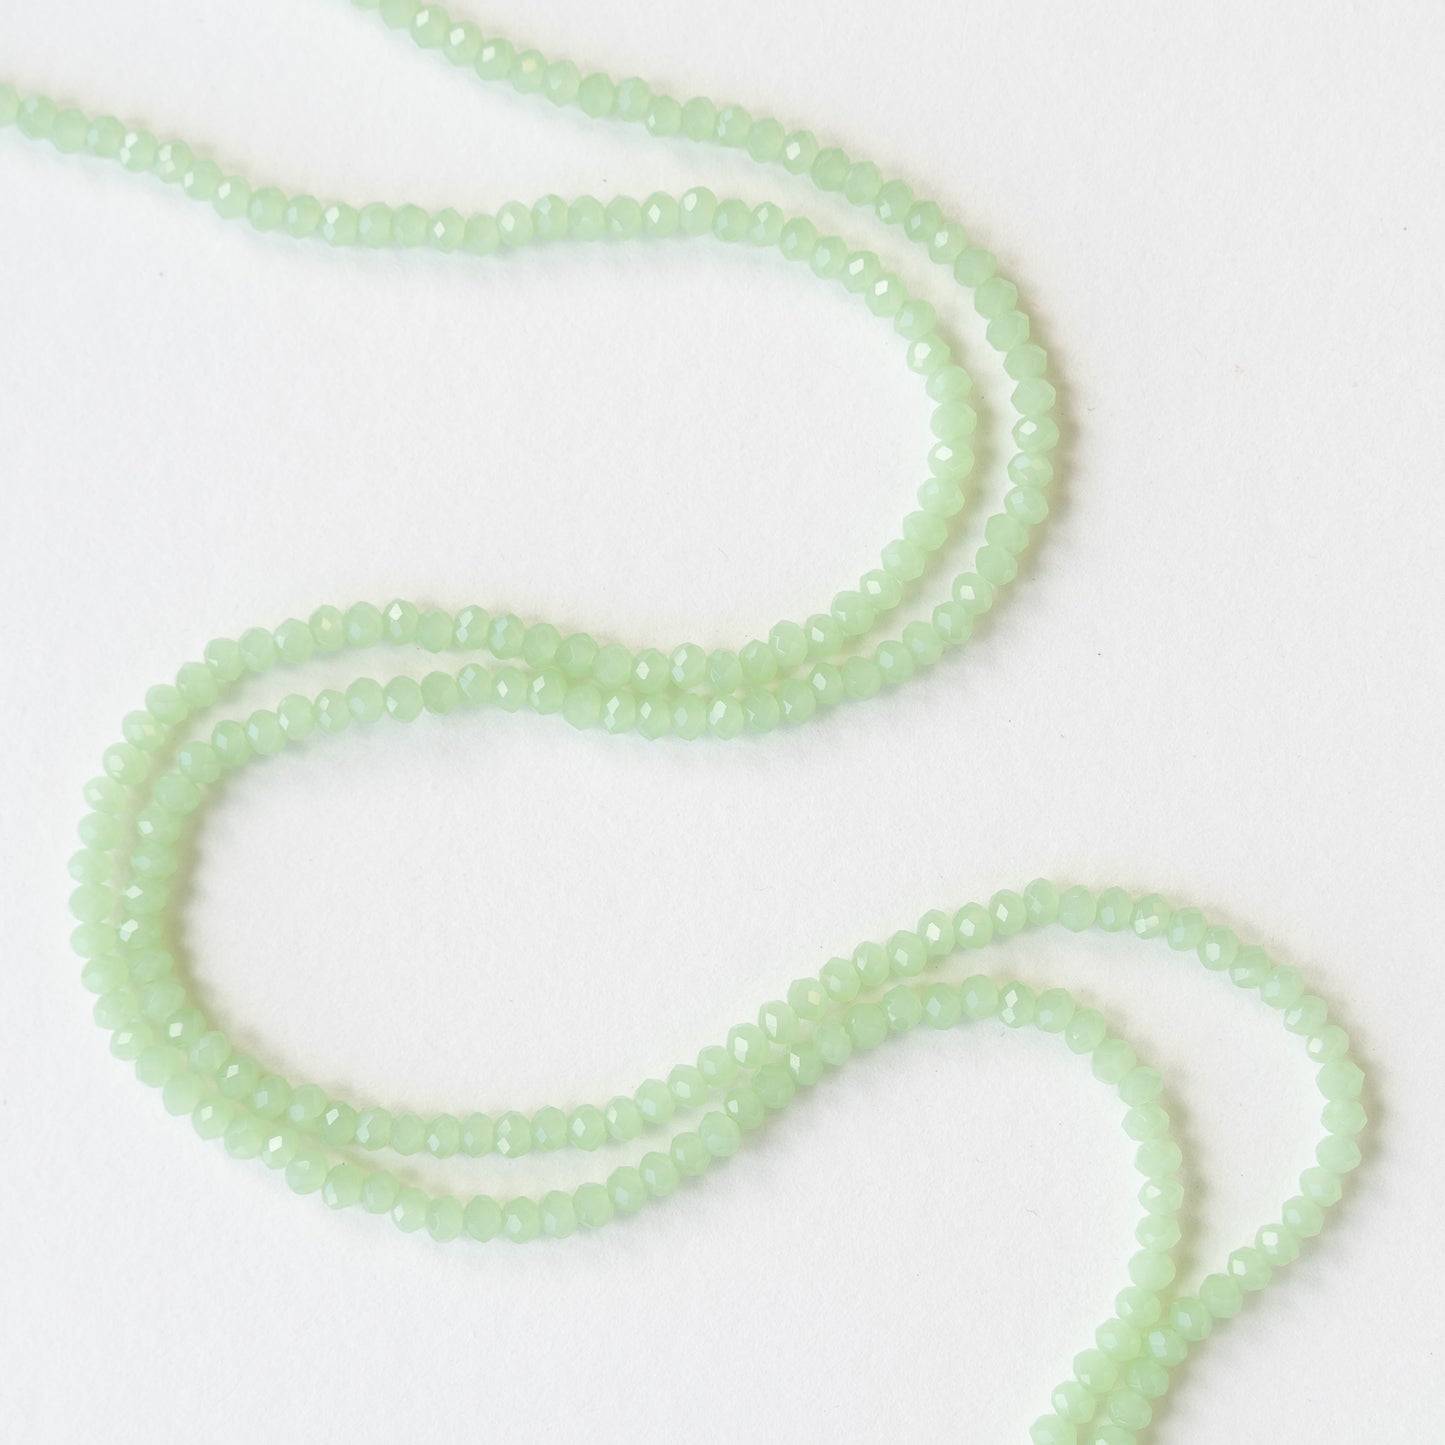 Load image into Gallery viewer, 3x2mm Faceted Glass Rondelle Beads - Summery Light Green - 16 Inches ~ 200 Beads
